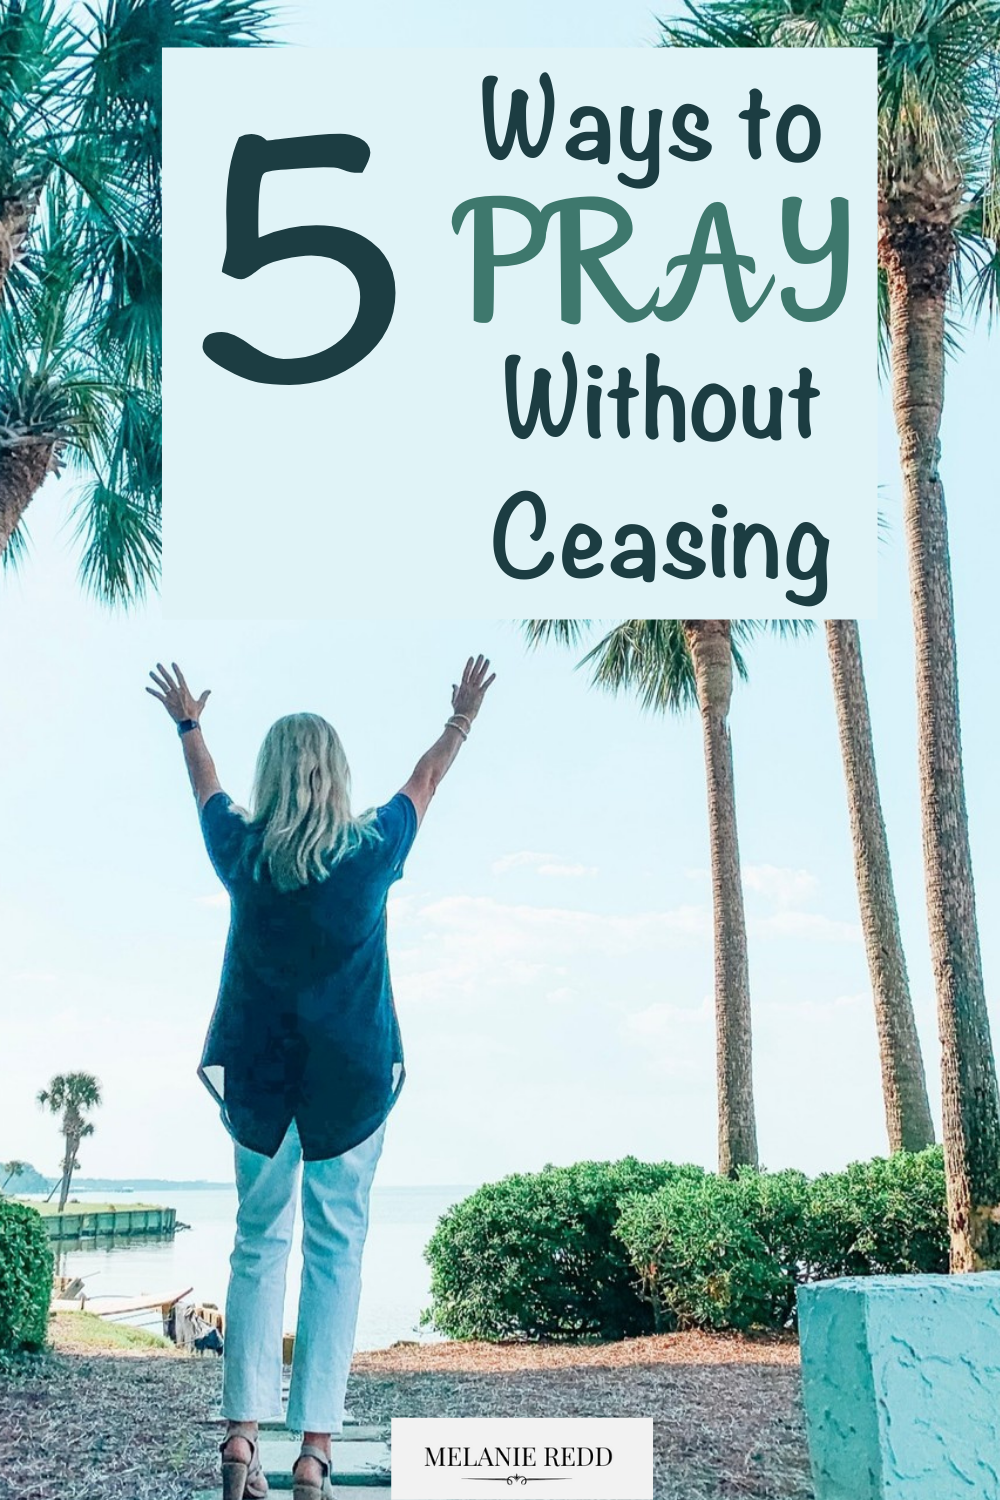 Would you like to have more power, hope, peace, inspiration, and victory in your life? Learn to how to pray without ceasing in this article.